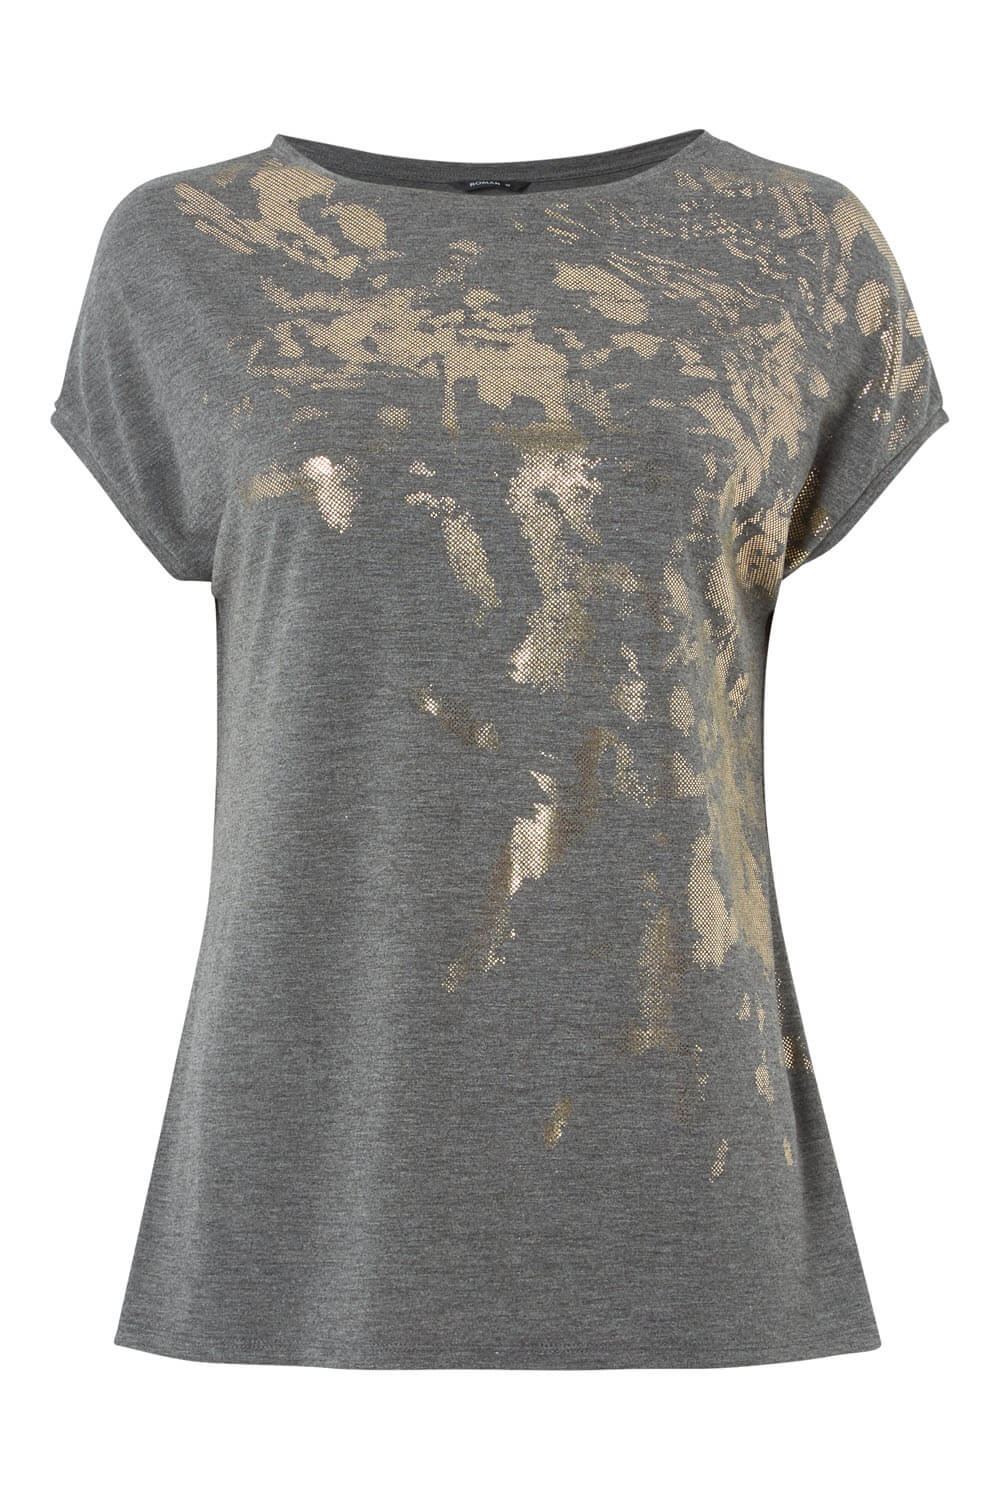 Grey Abstract Foil Print T-Shirt Top, Image 4 of 4